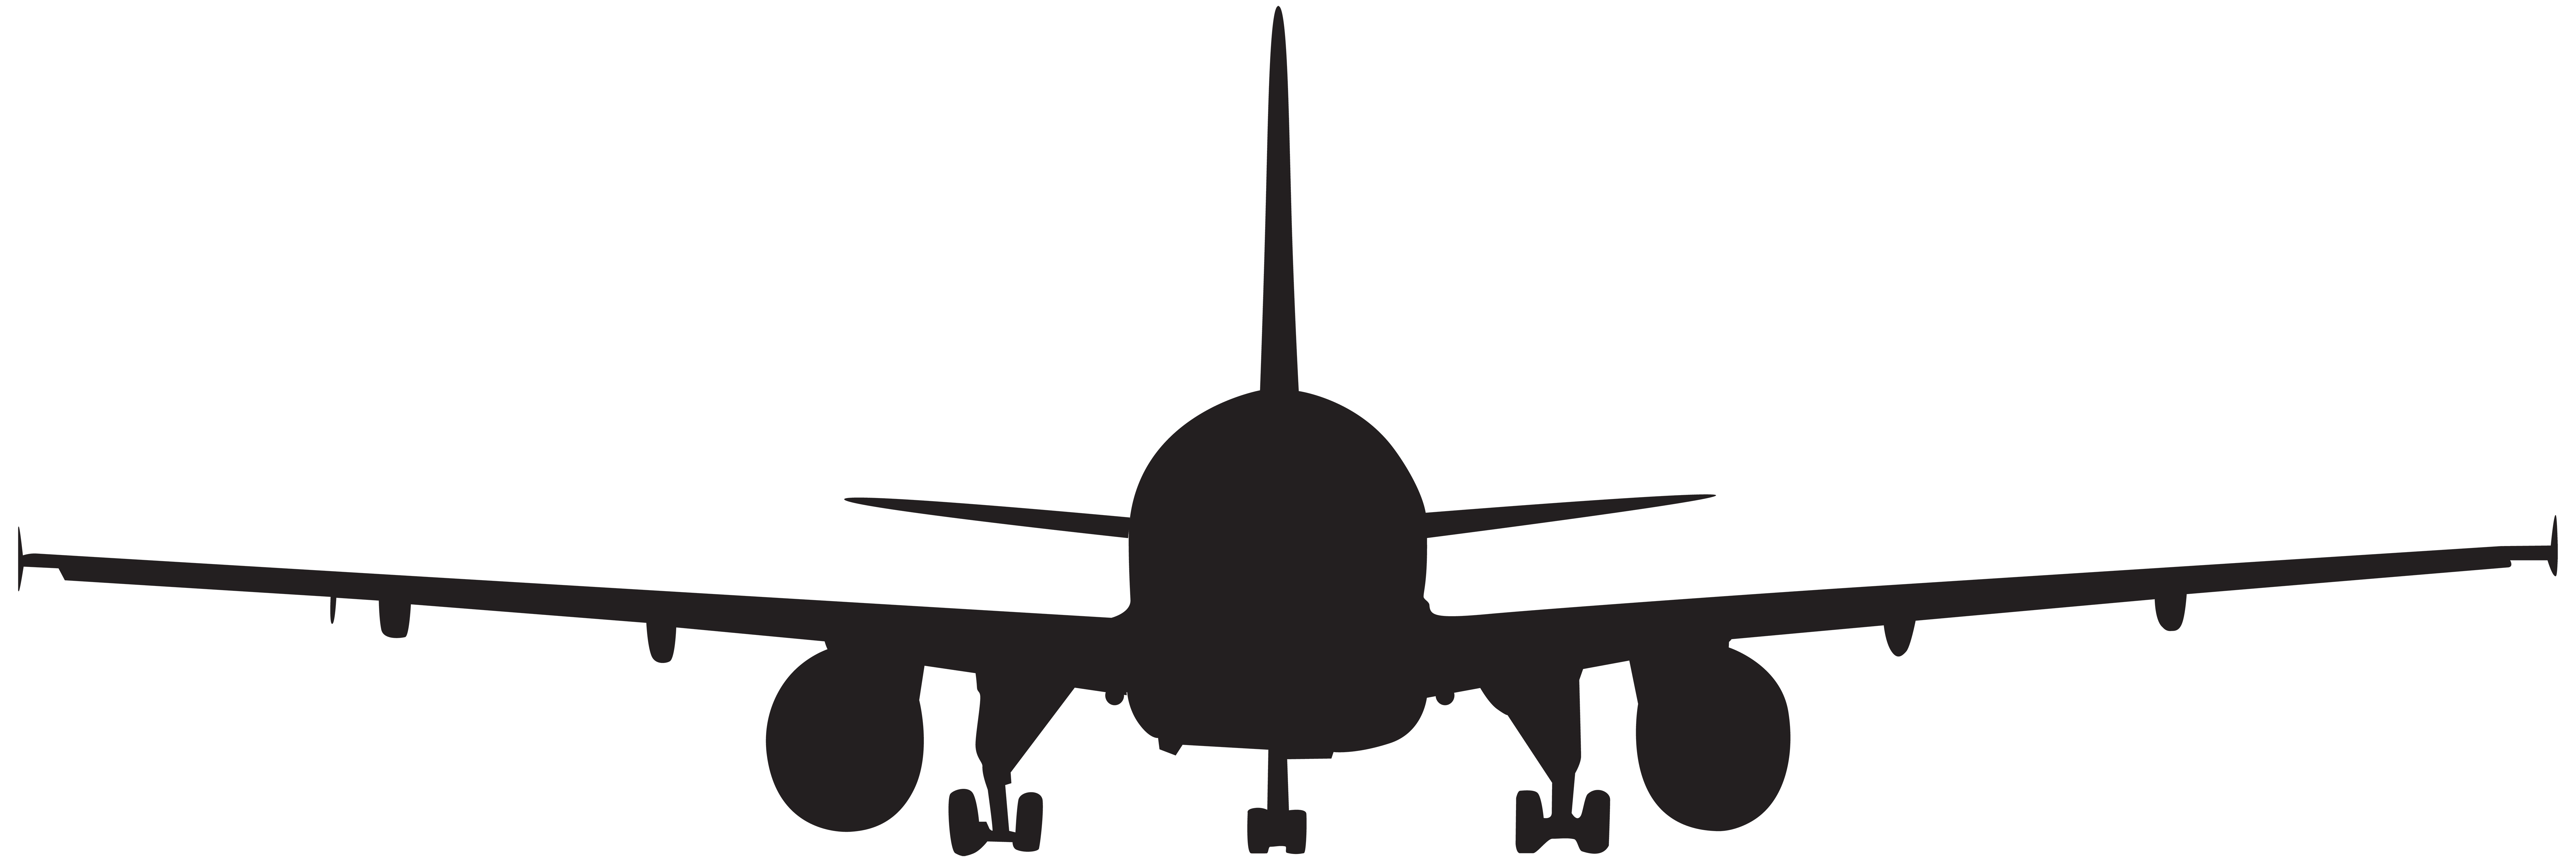 Airplane Moscow Aircraft Clip art Airplane Silhouette